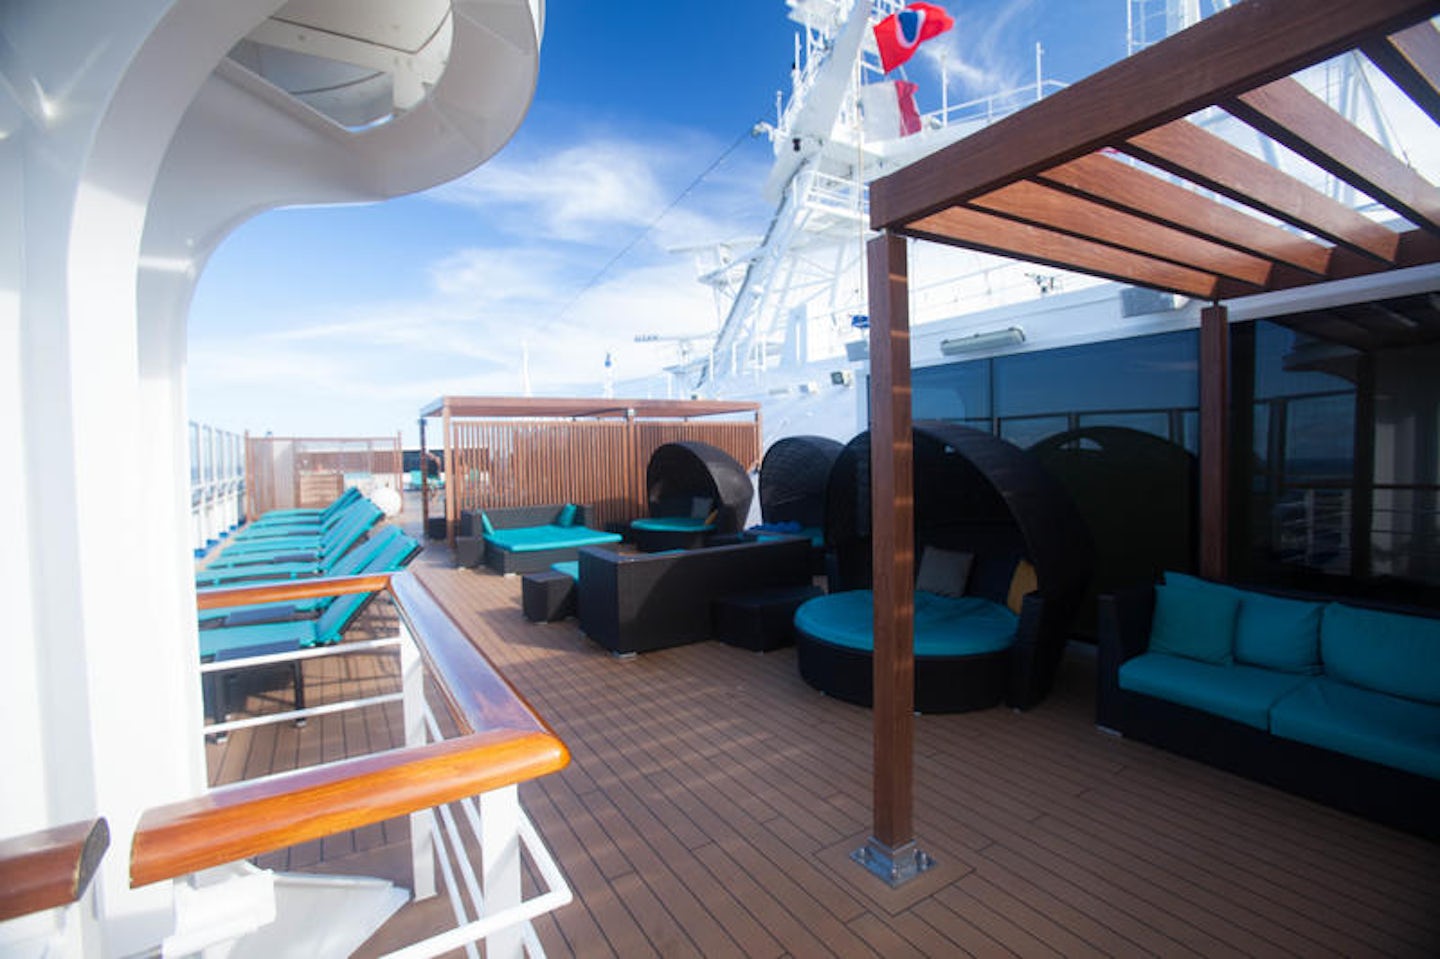 The Serenity on Carnival Breeze